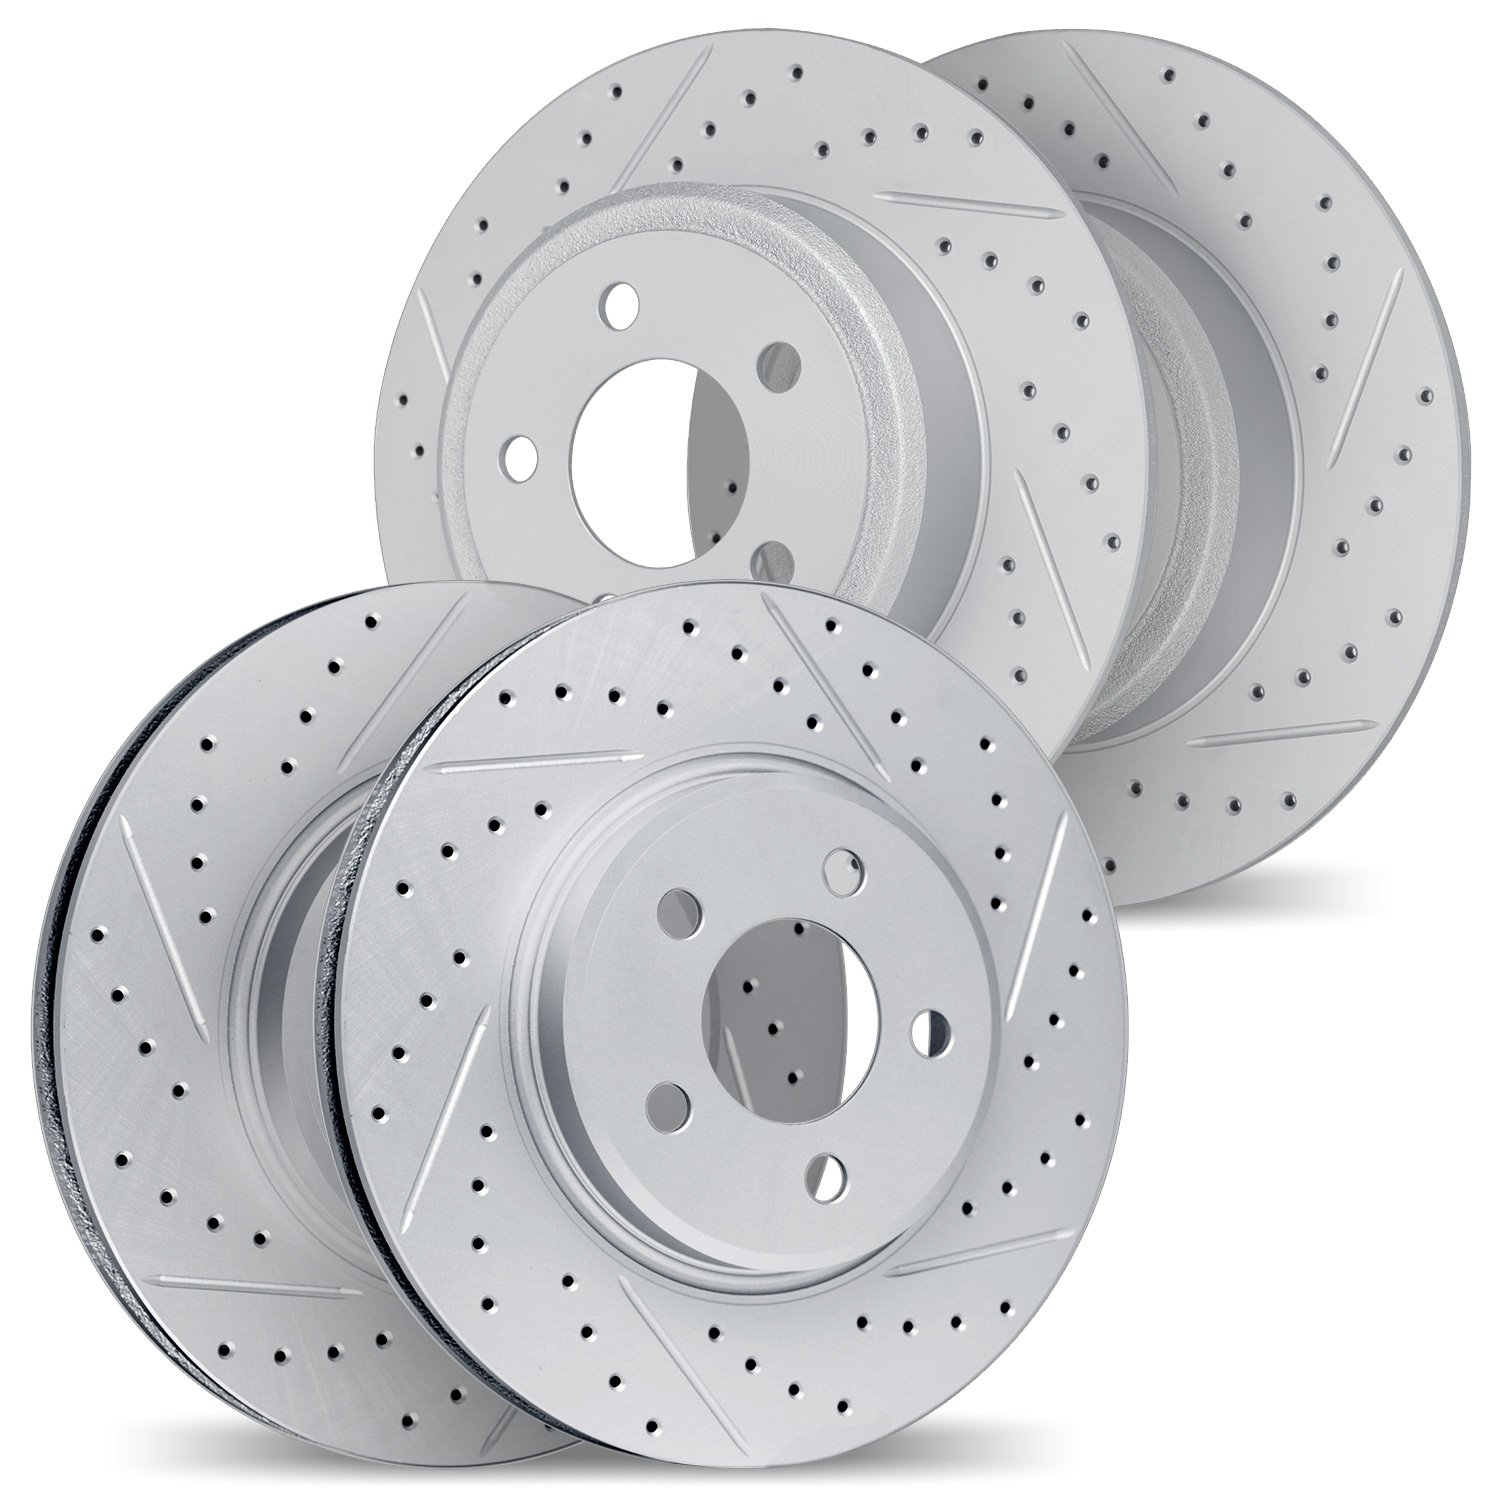 2004-40008 Geoperformance Drilled/Slotted Brake Rotors, 1998-2004 Mopar, Position: Front and Rear